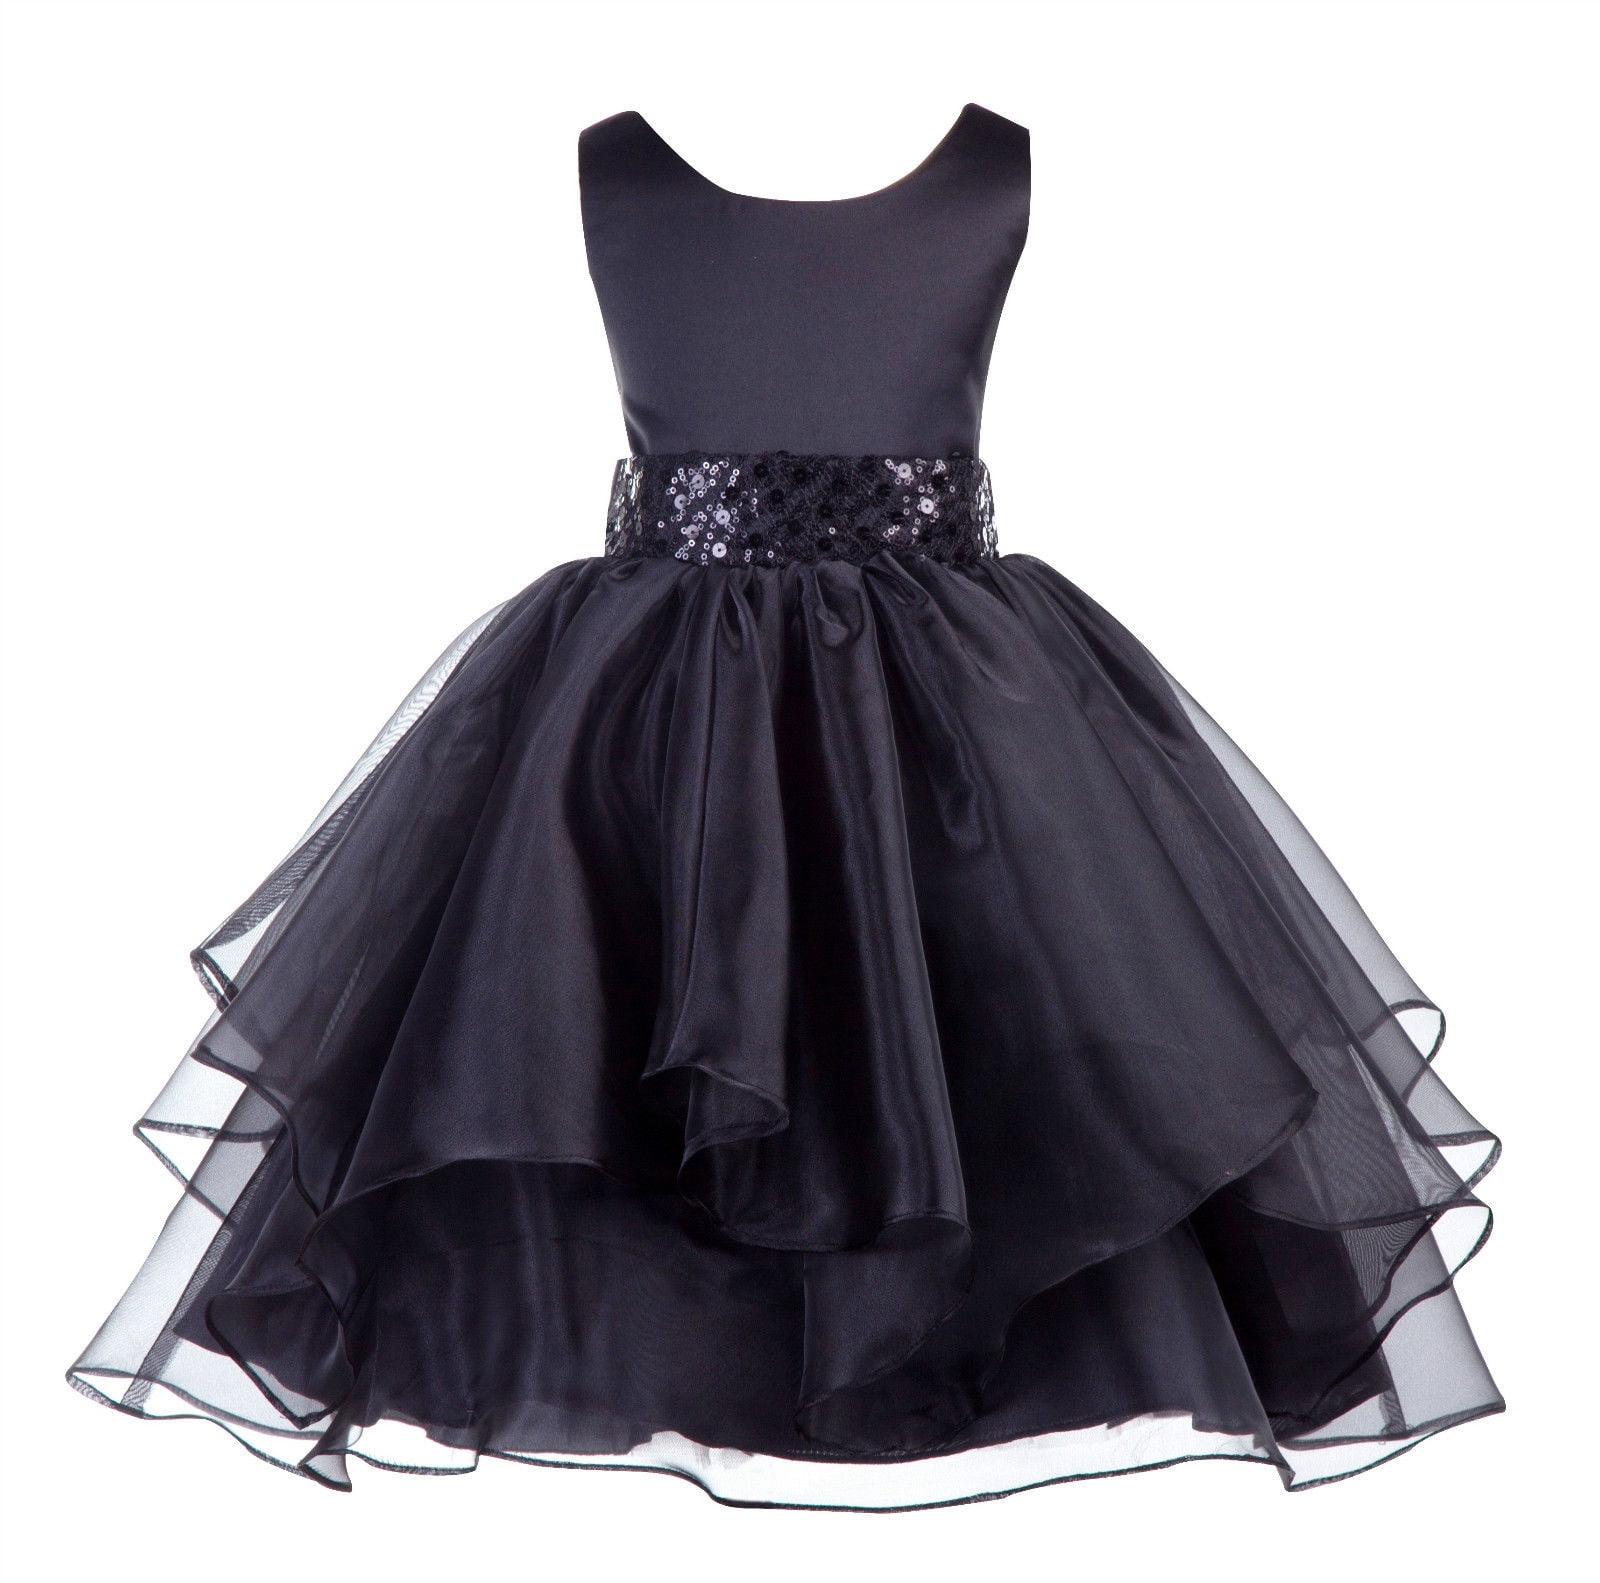 black and gold toddler dress